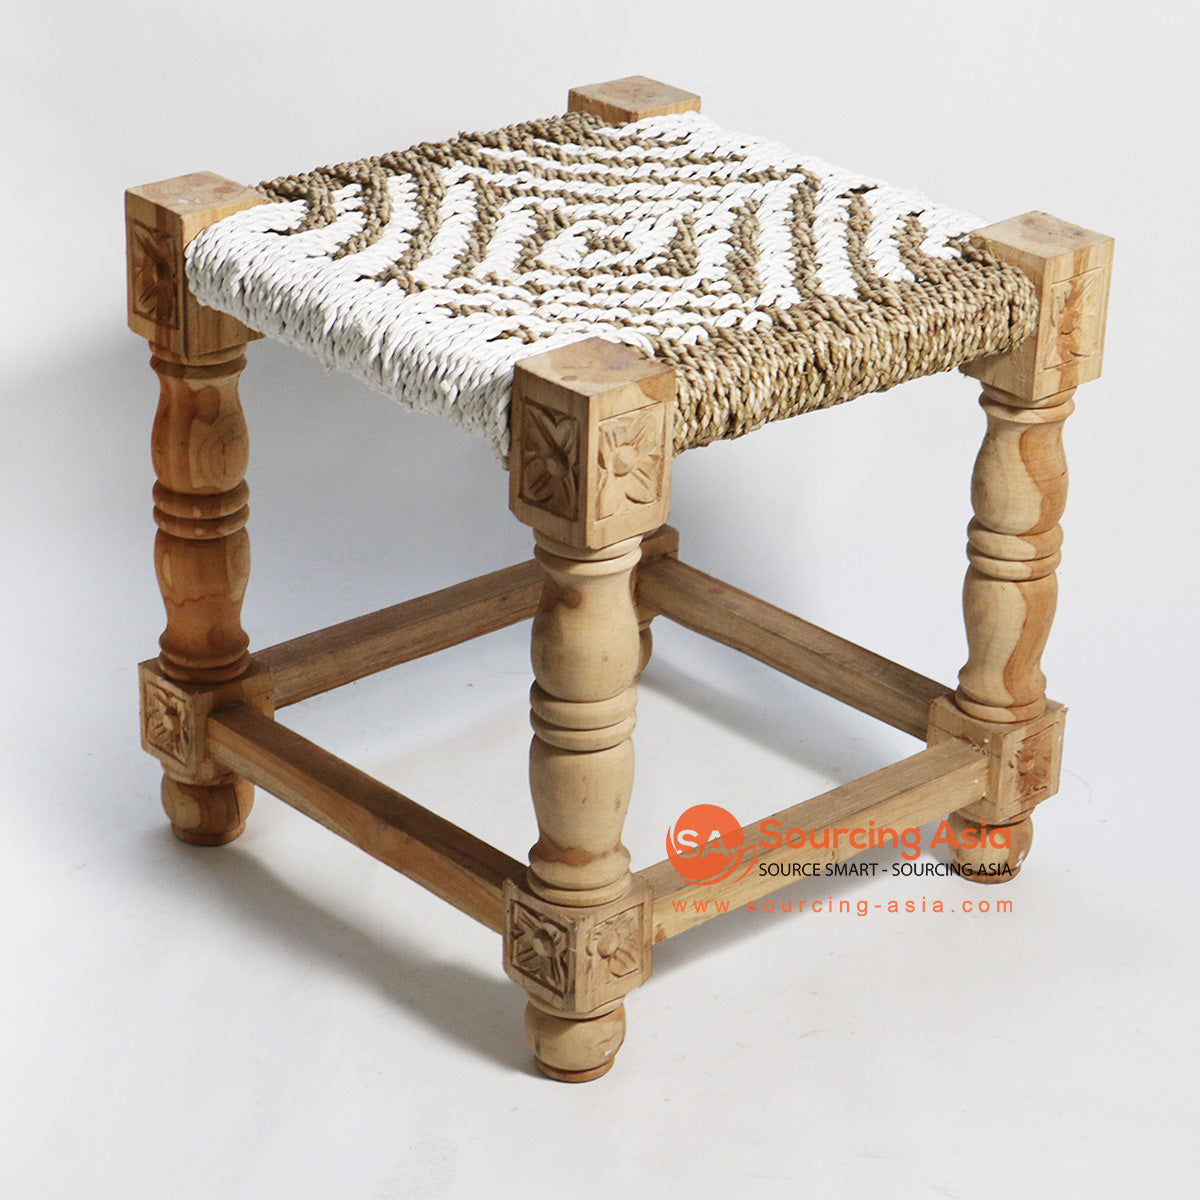 HBSC165 NATURAL AND WHITE SEAGRASS STOOL